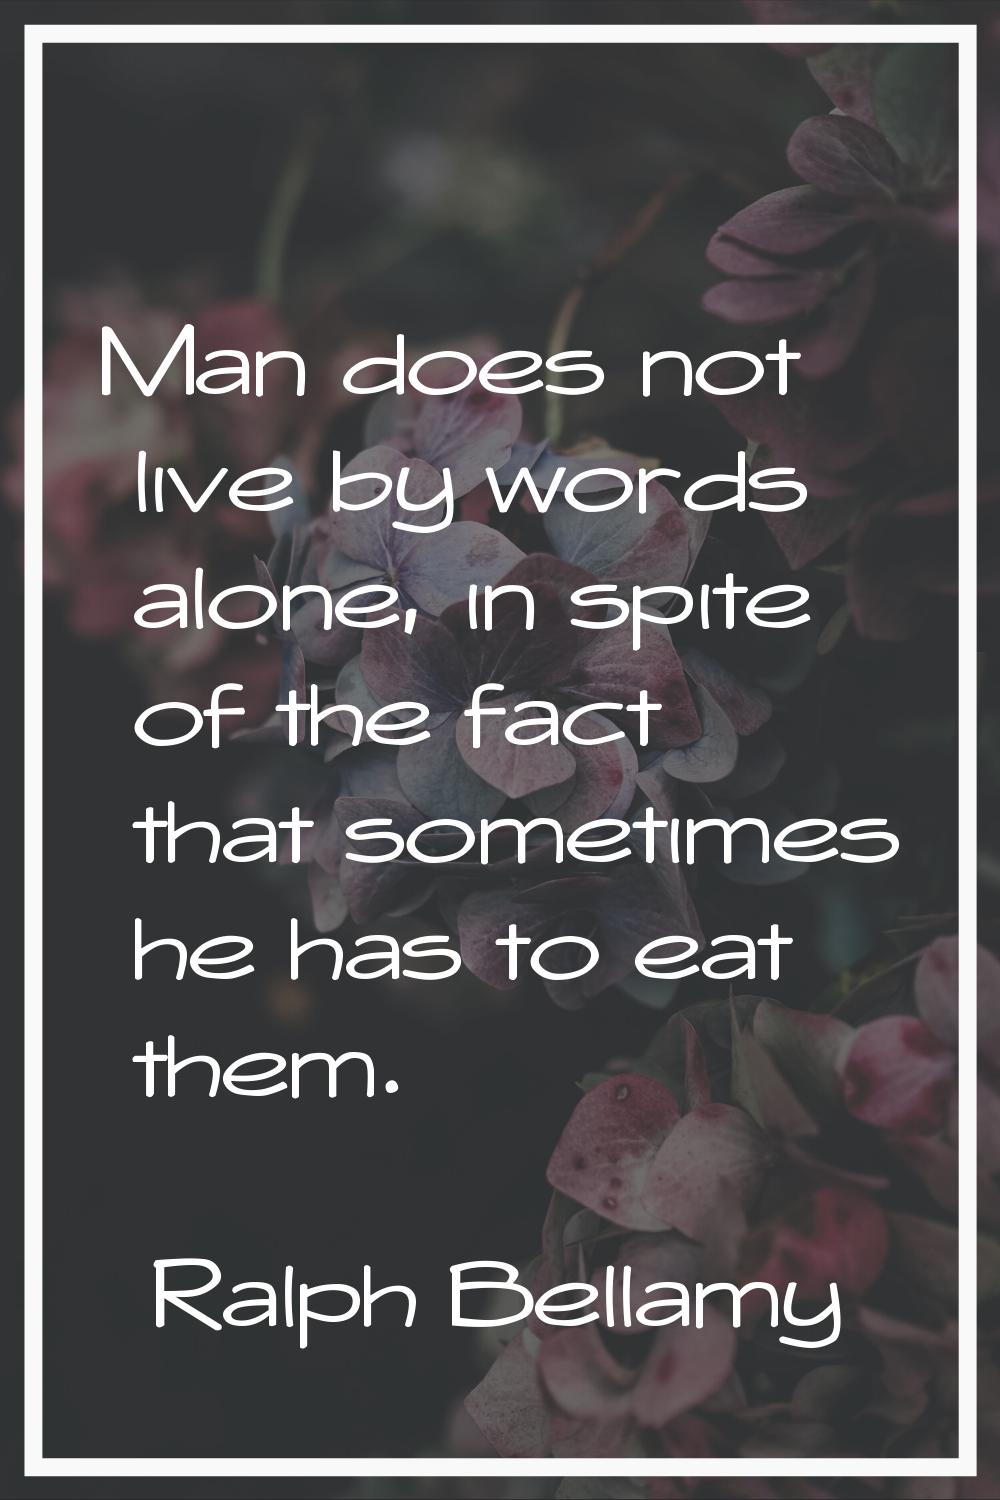 Man does not live by words alone, in spite of the fact that sometimes he has to eat them.